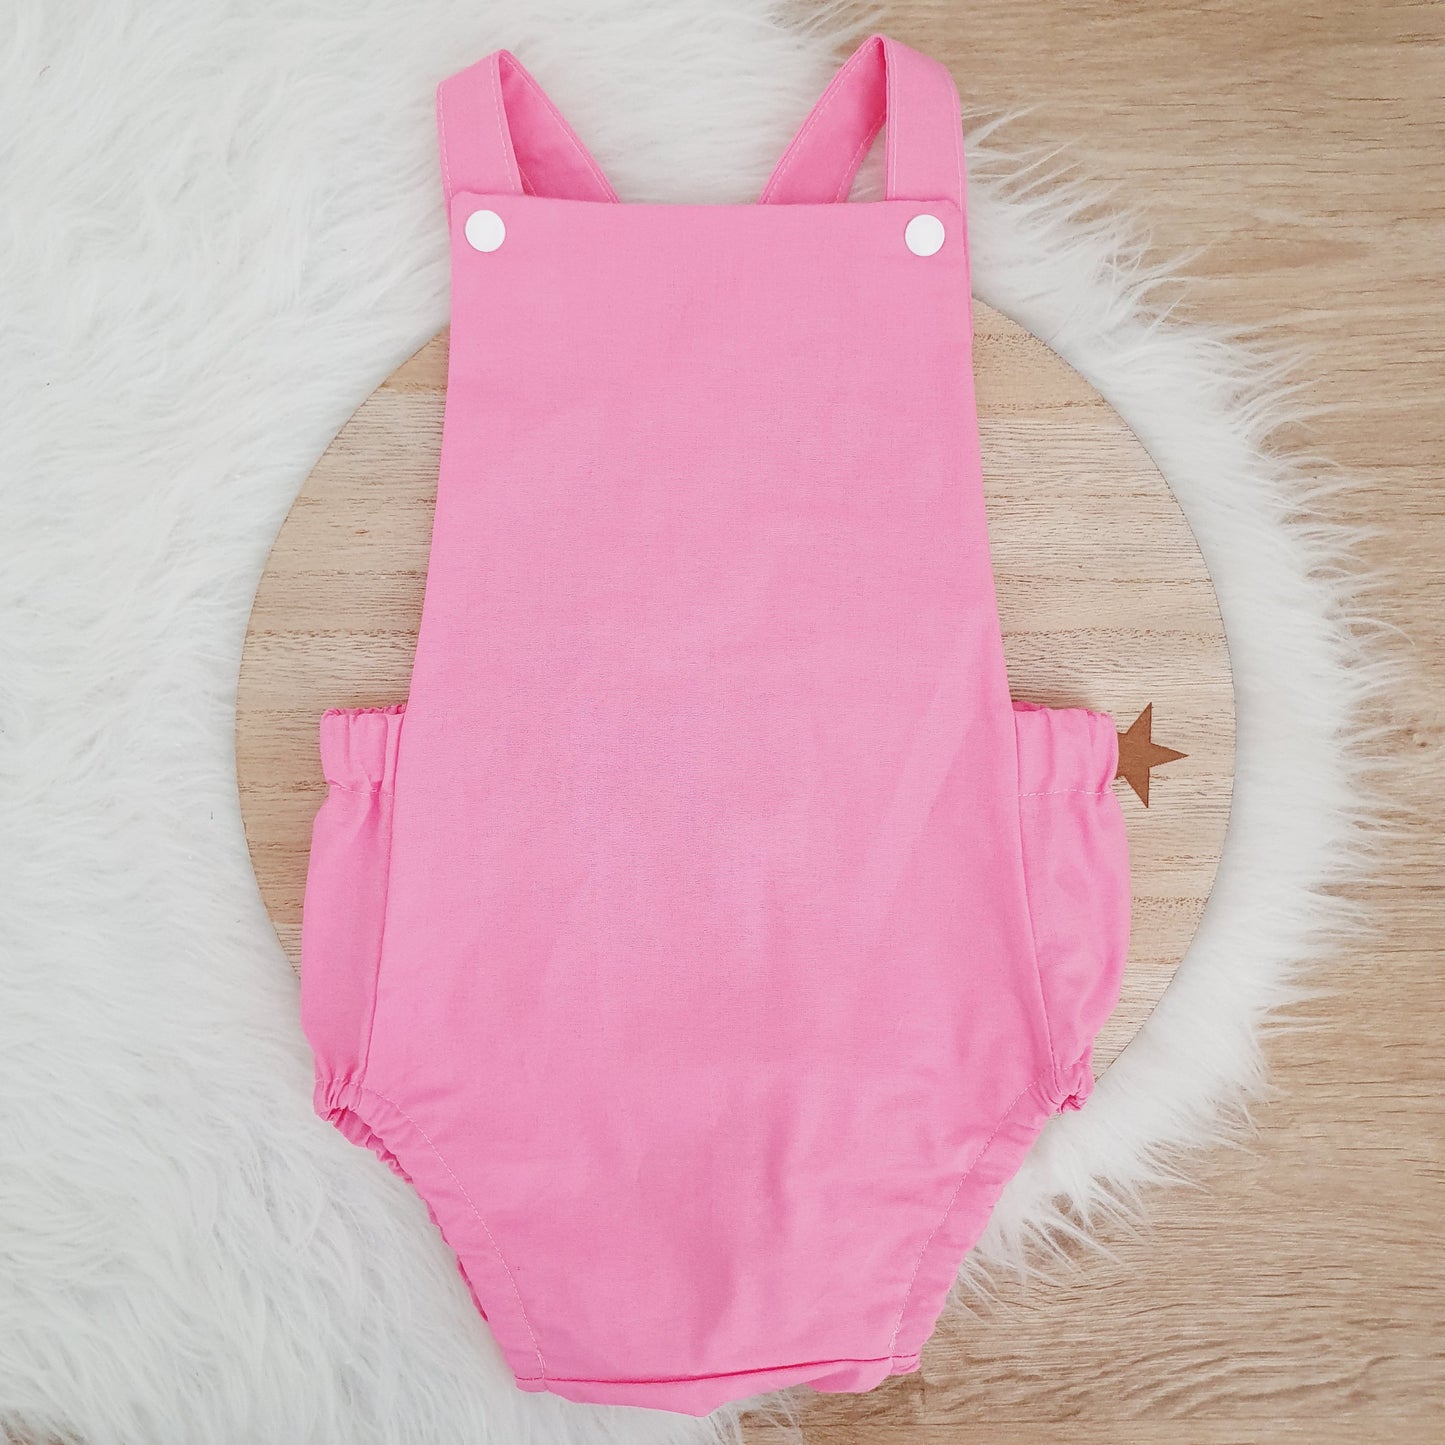 PINK Baby Romper, Handmade Baby Clothing, Size 1 - 1st Birthday Clothing / Cake Smash Outfit - PINK, 12 - 18 months